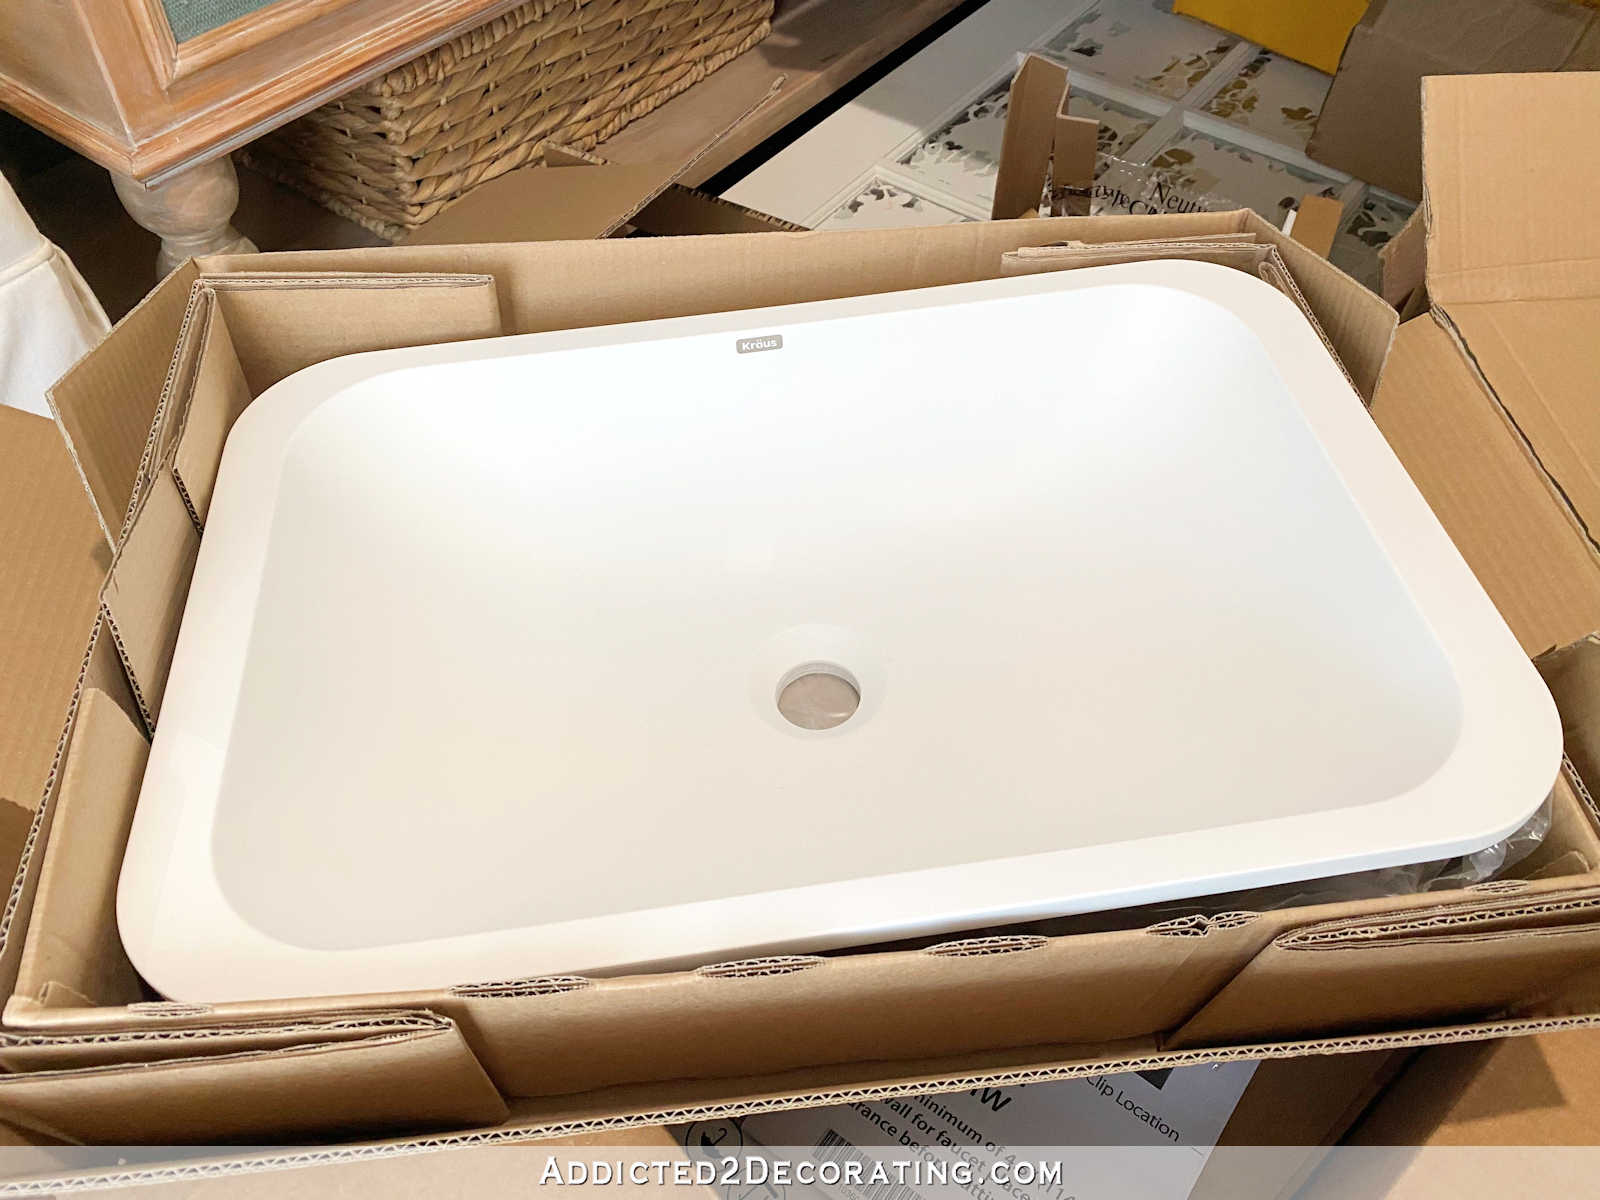 I Finally Found A Shallow Undermount Bathroom Sink For A Table-Style Vanity